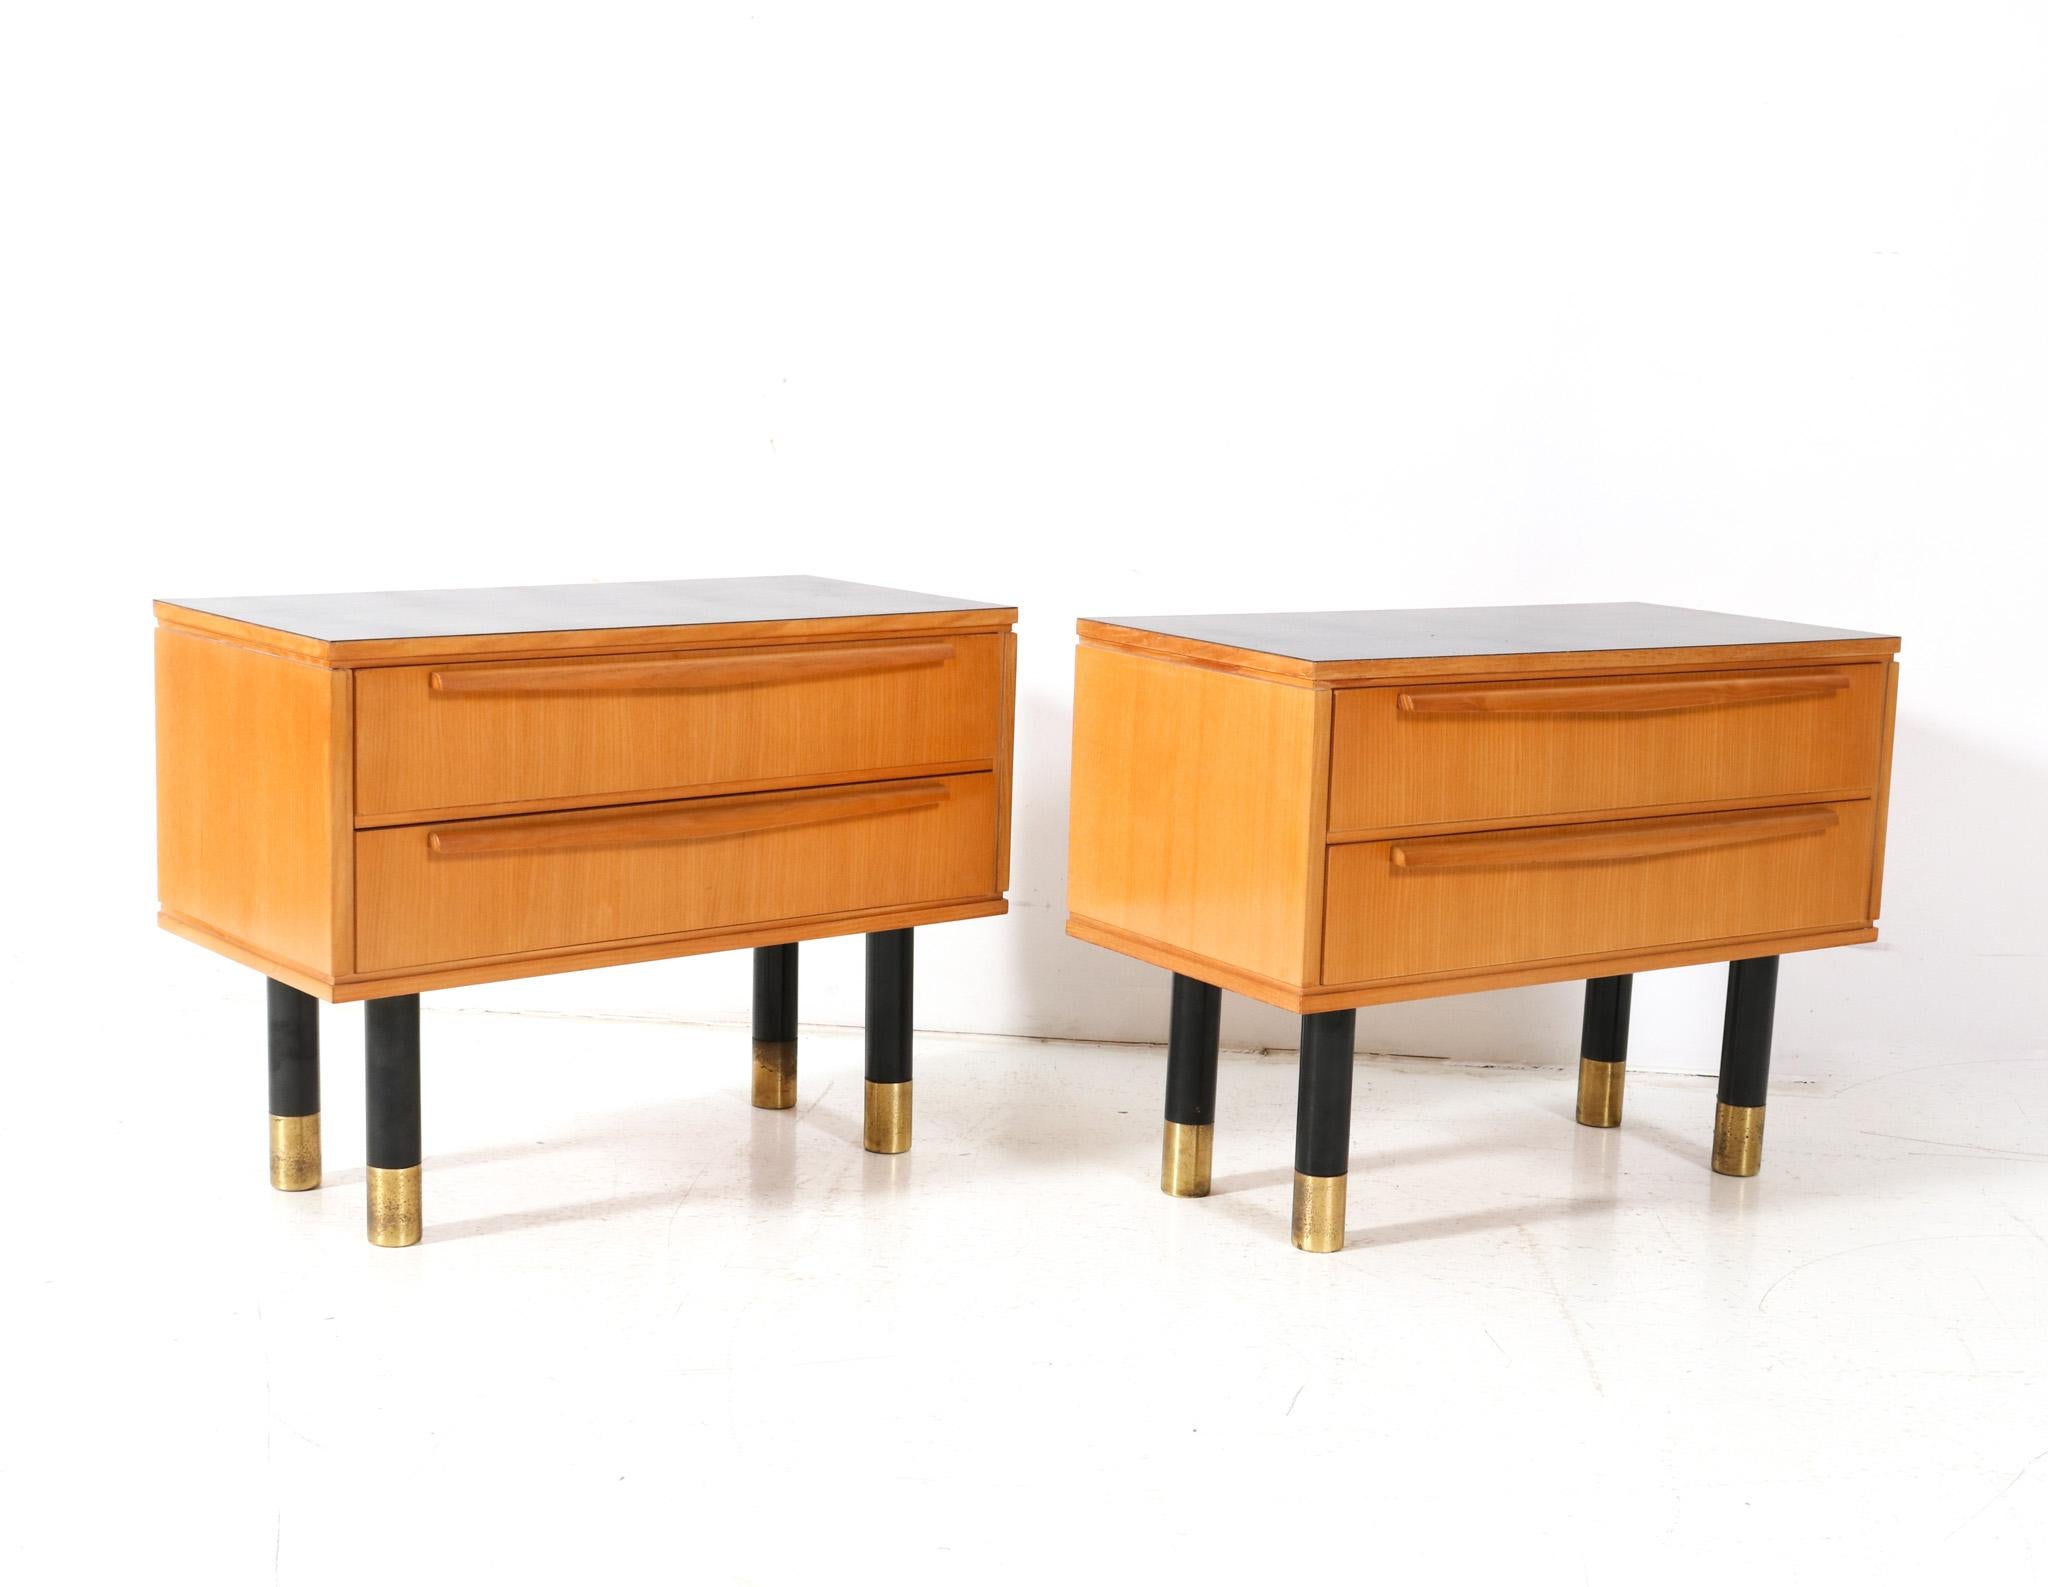 Mid-20th Century Two Ash Mid-Century Modern Nightstands or Bedside Tables, 1950s For Sale